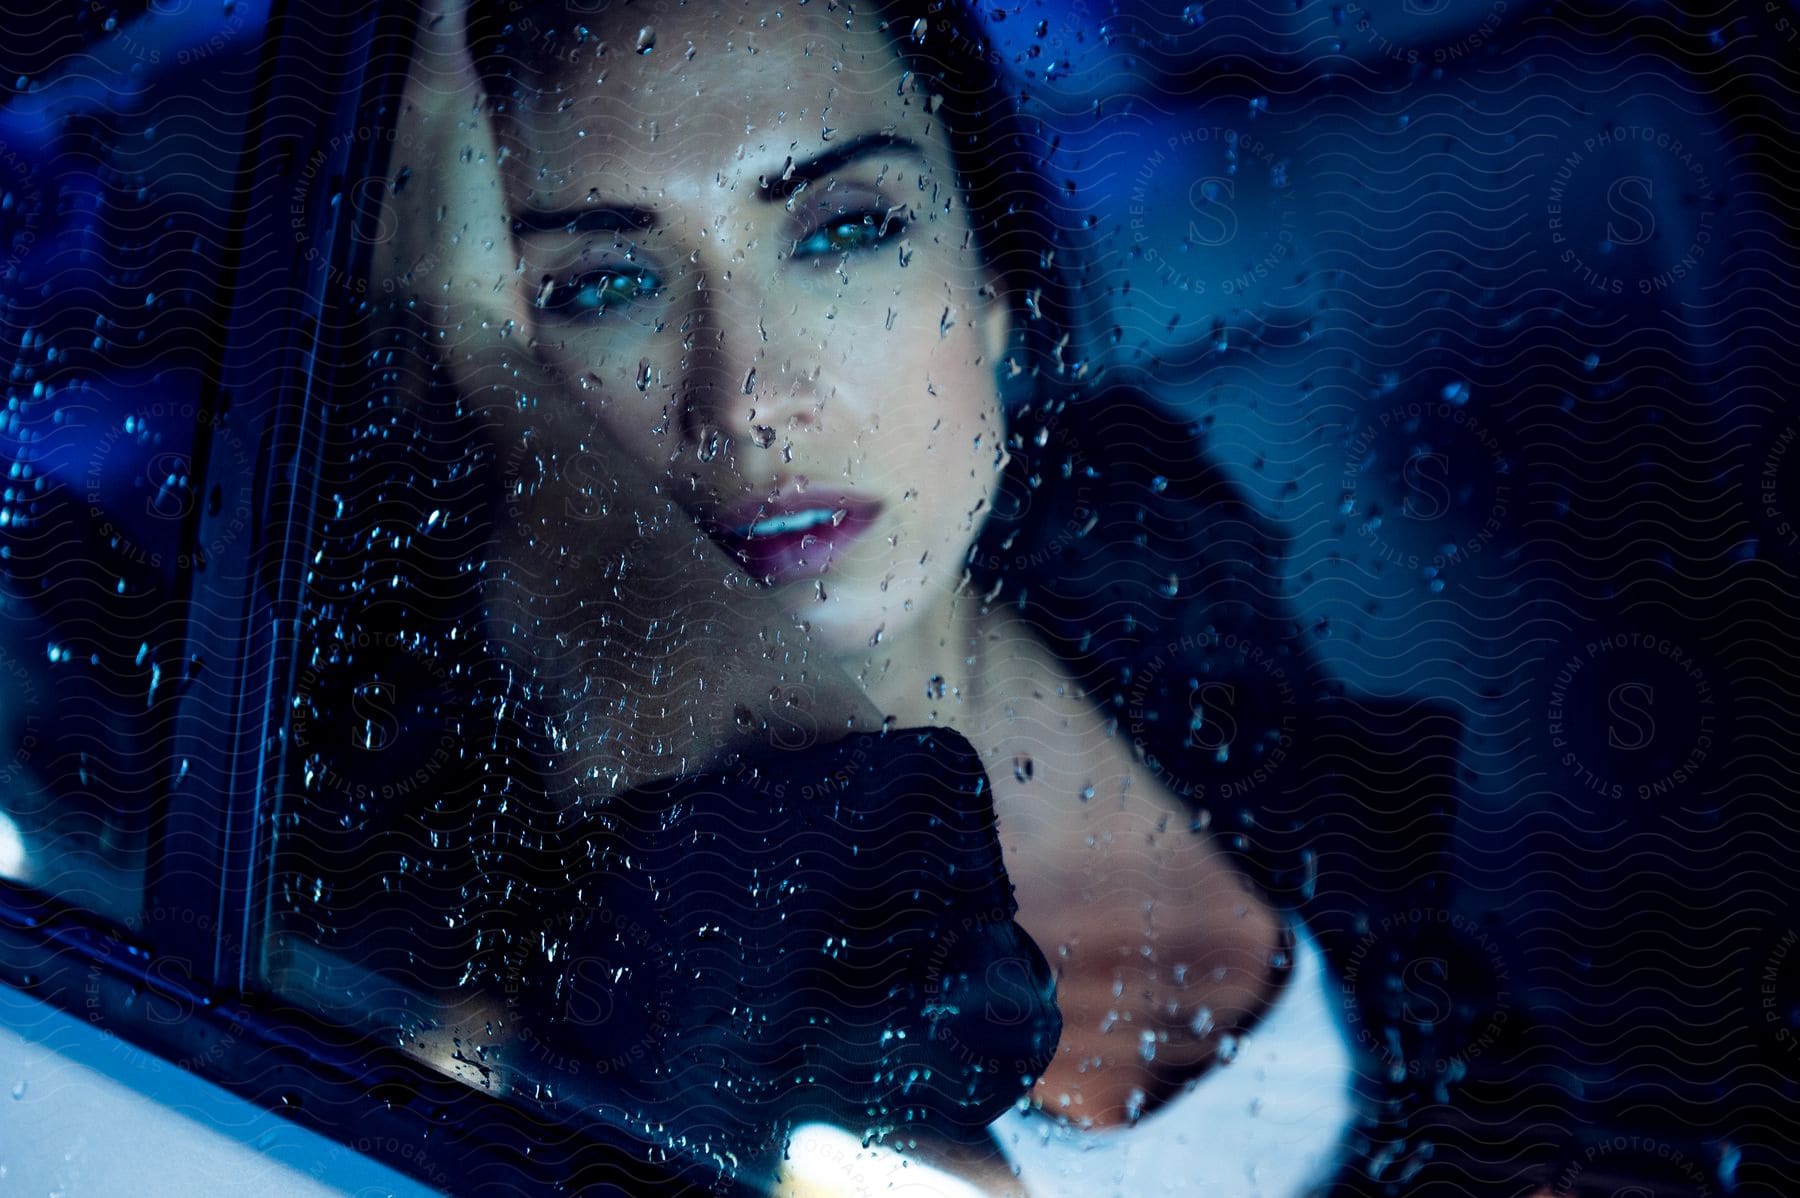 Darkhaired woman posing inside a car seen through the window covered in water drops